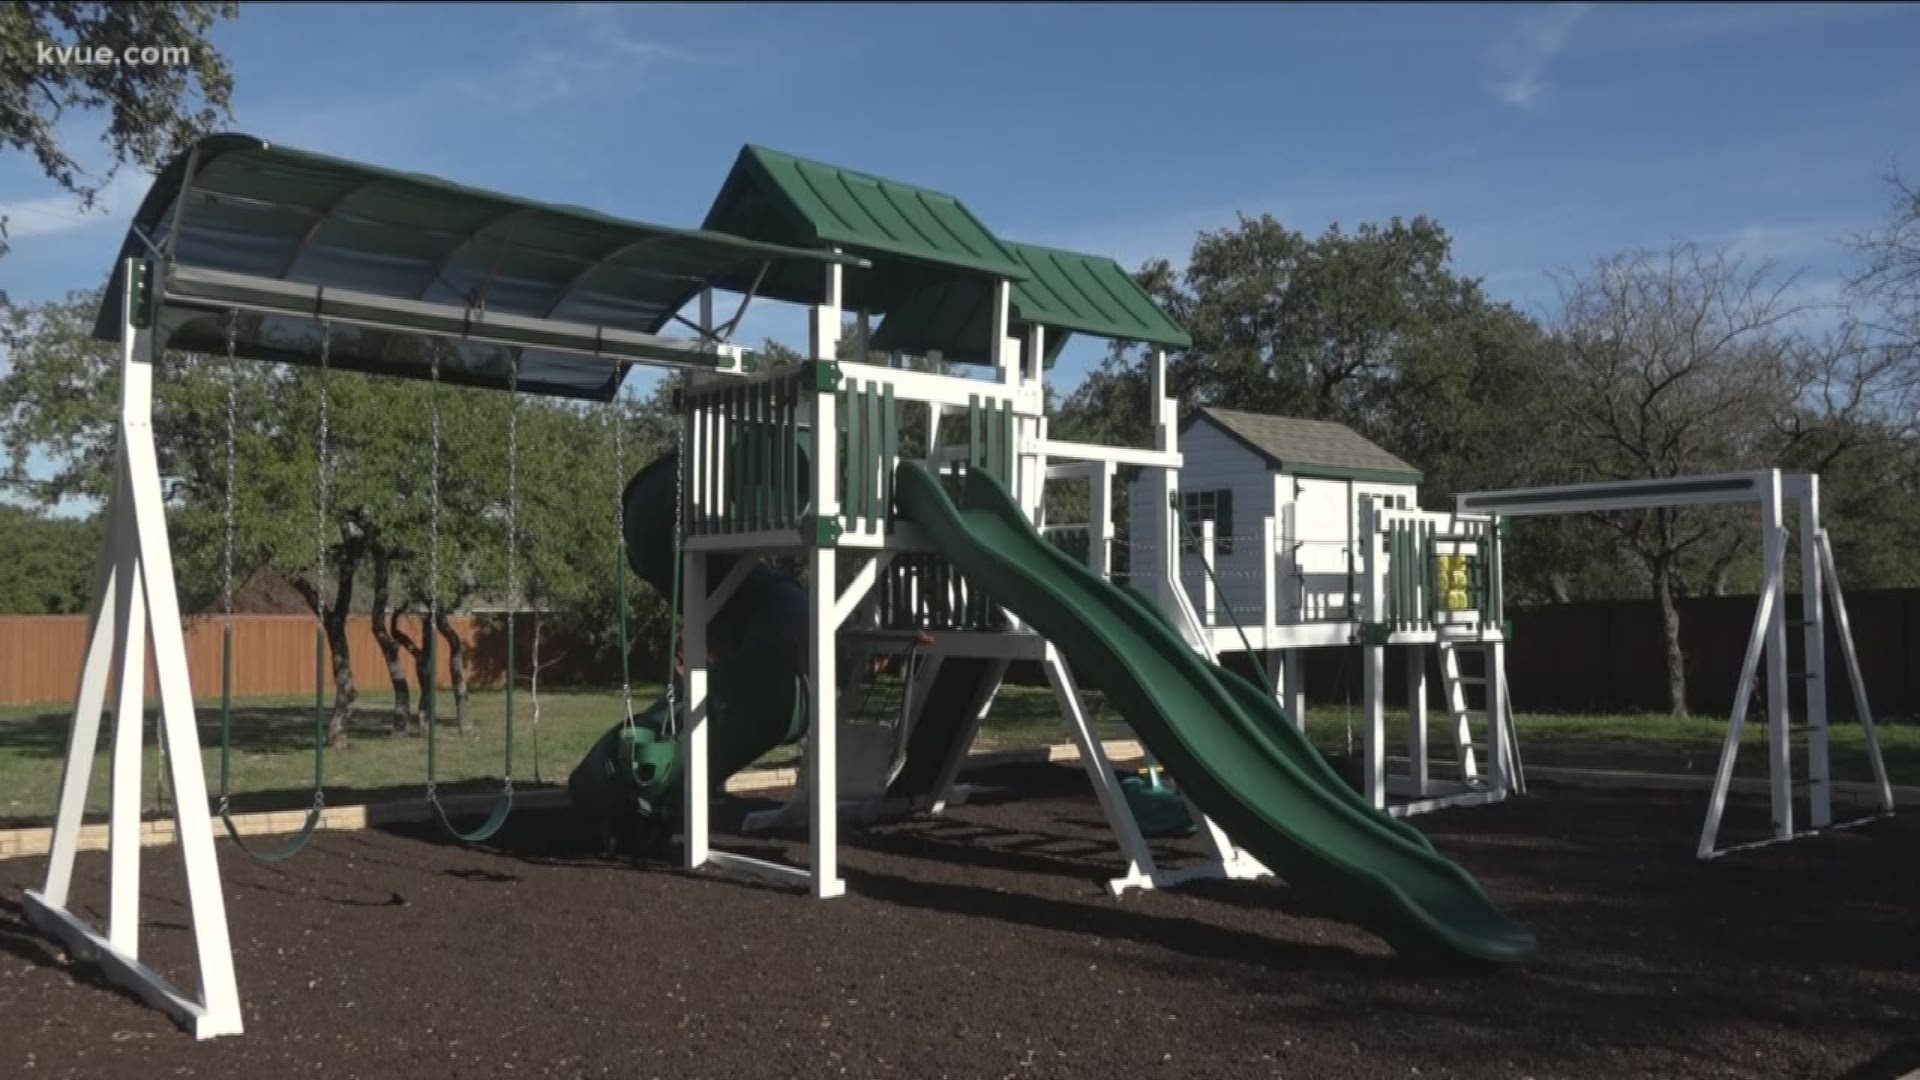 A Georgetown family is being sued because of a playset in their backyard.